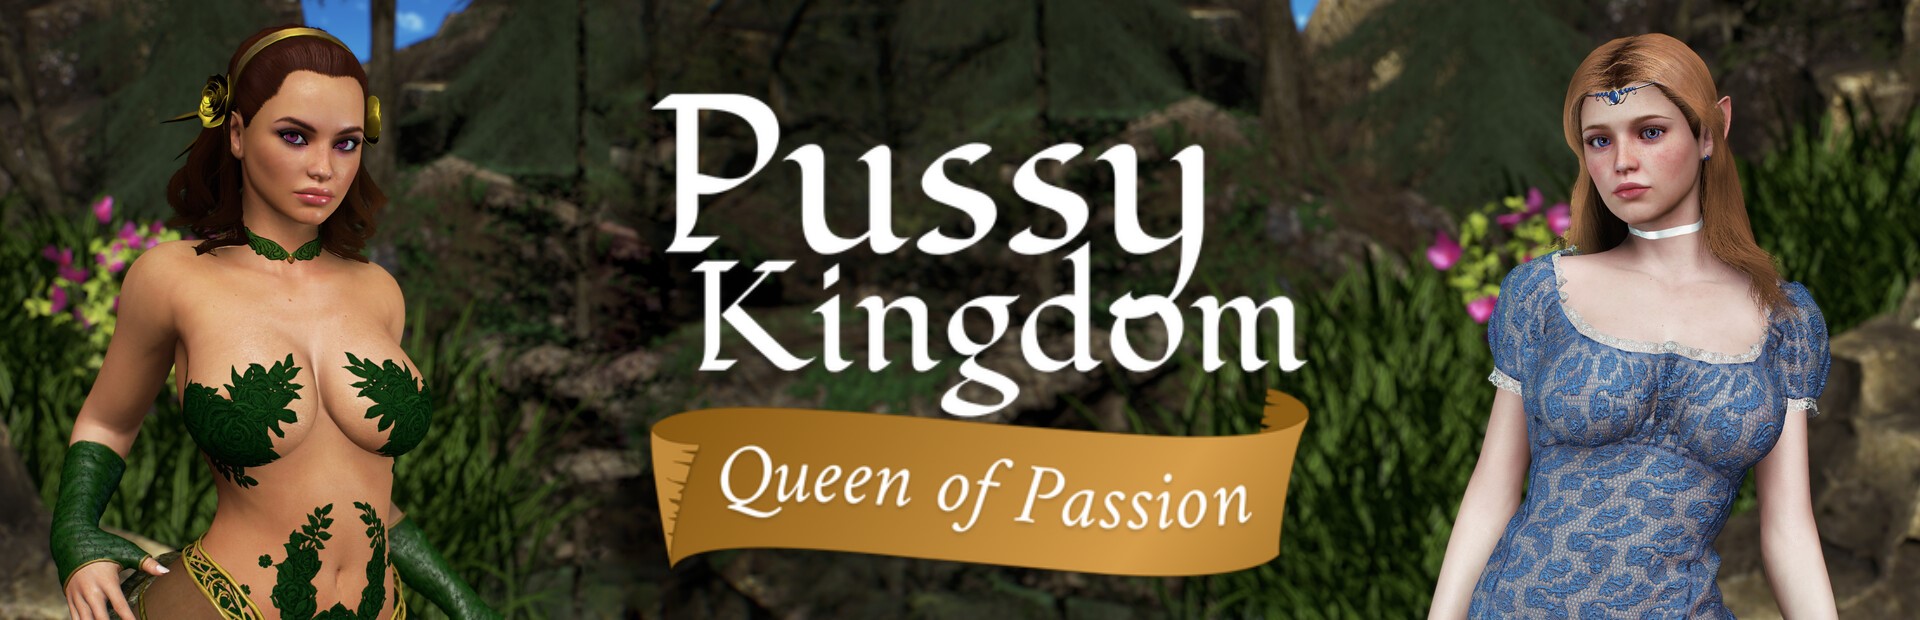 Pussy Kingdom: Queen of Passion poster